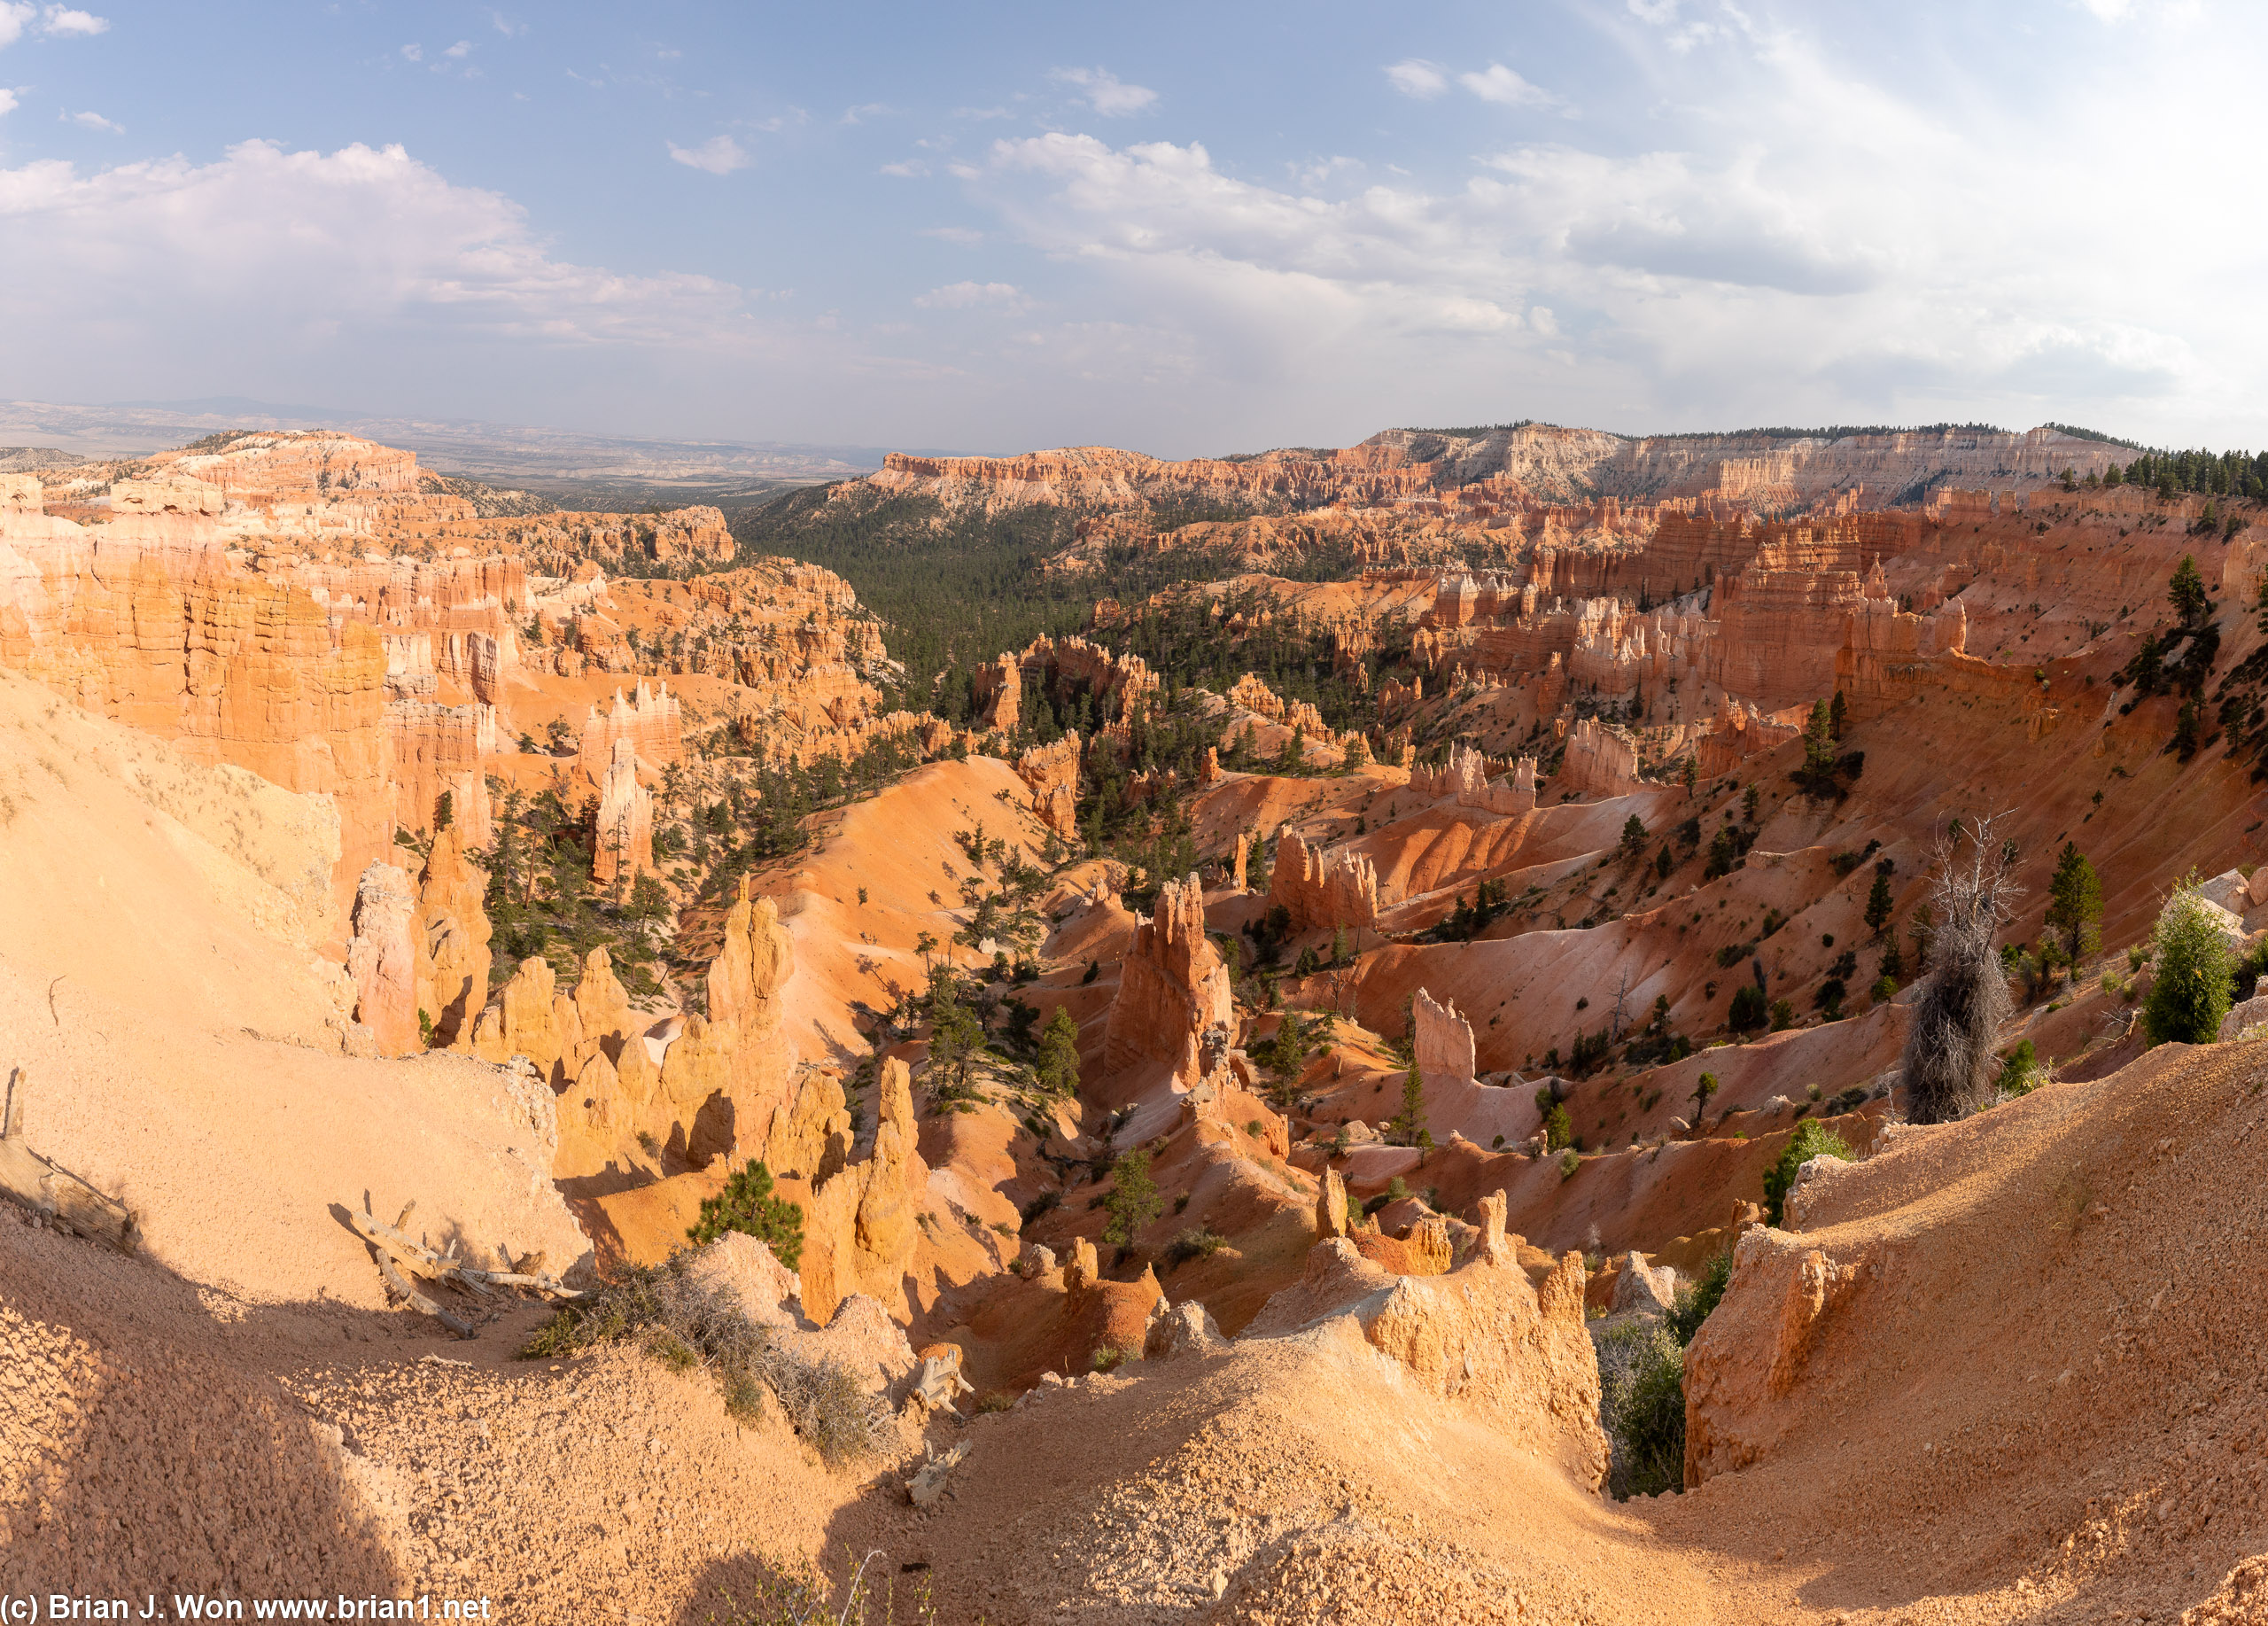 Slightly different angle of Bryce Canyon Ampitheater.